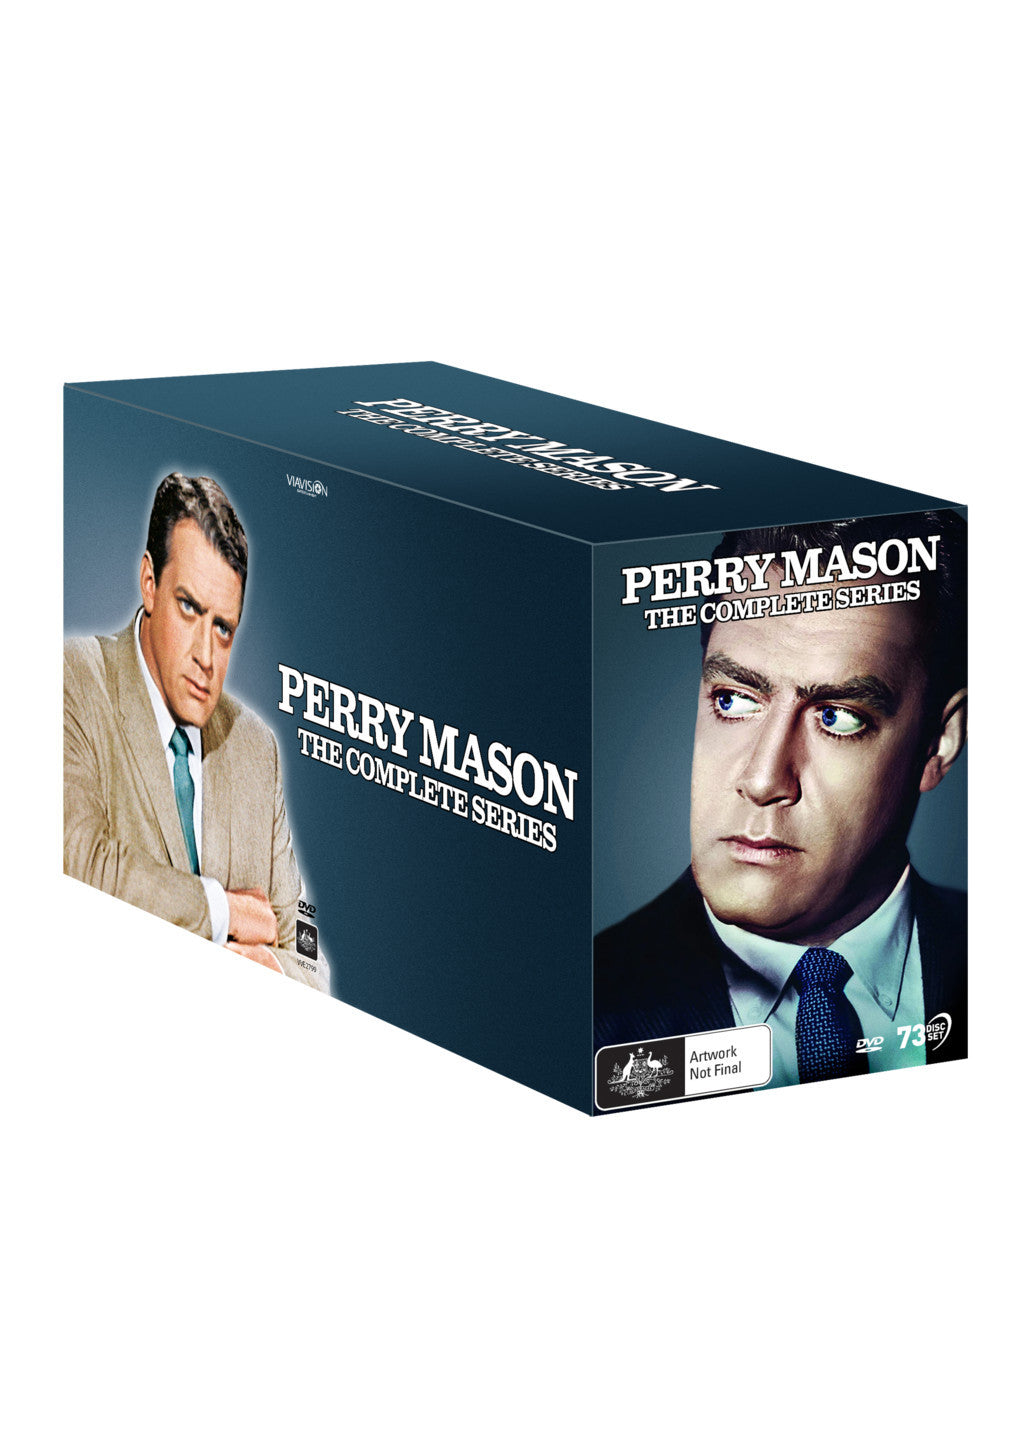 PERRY MASON - THE COMPLETE SERIES